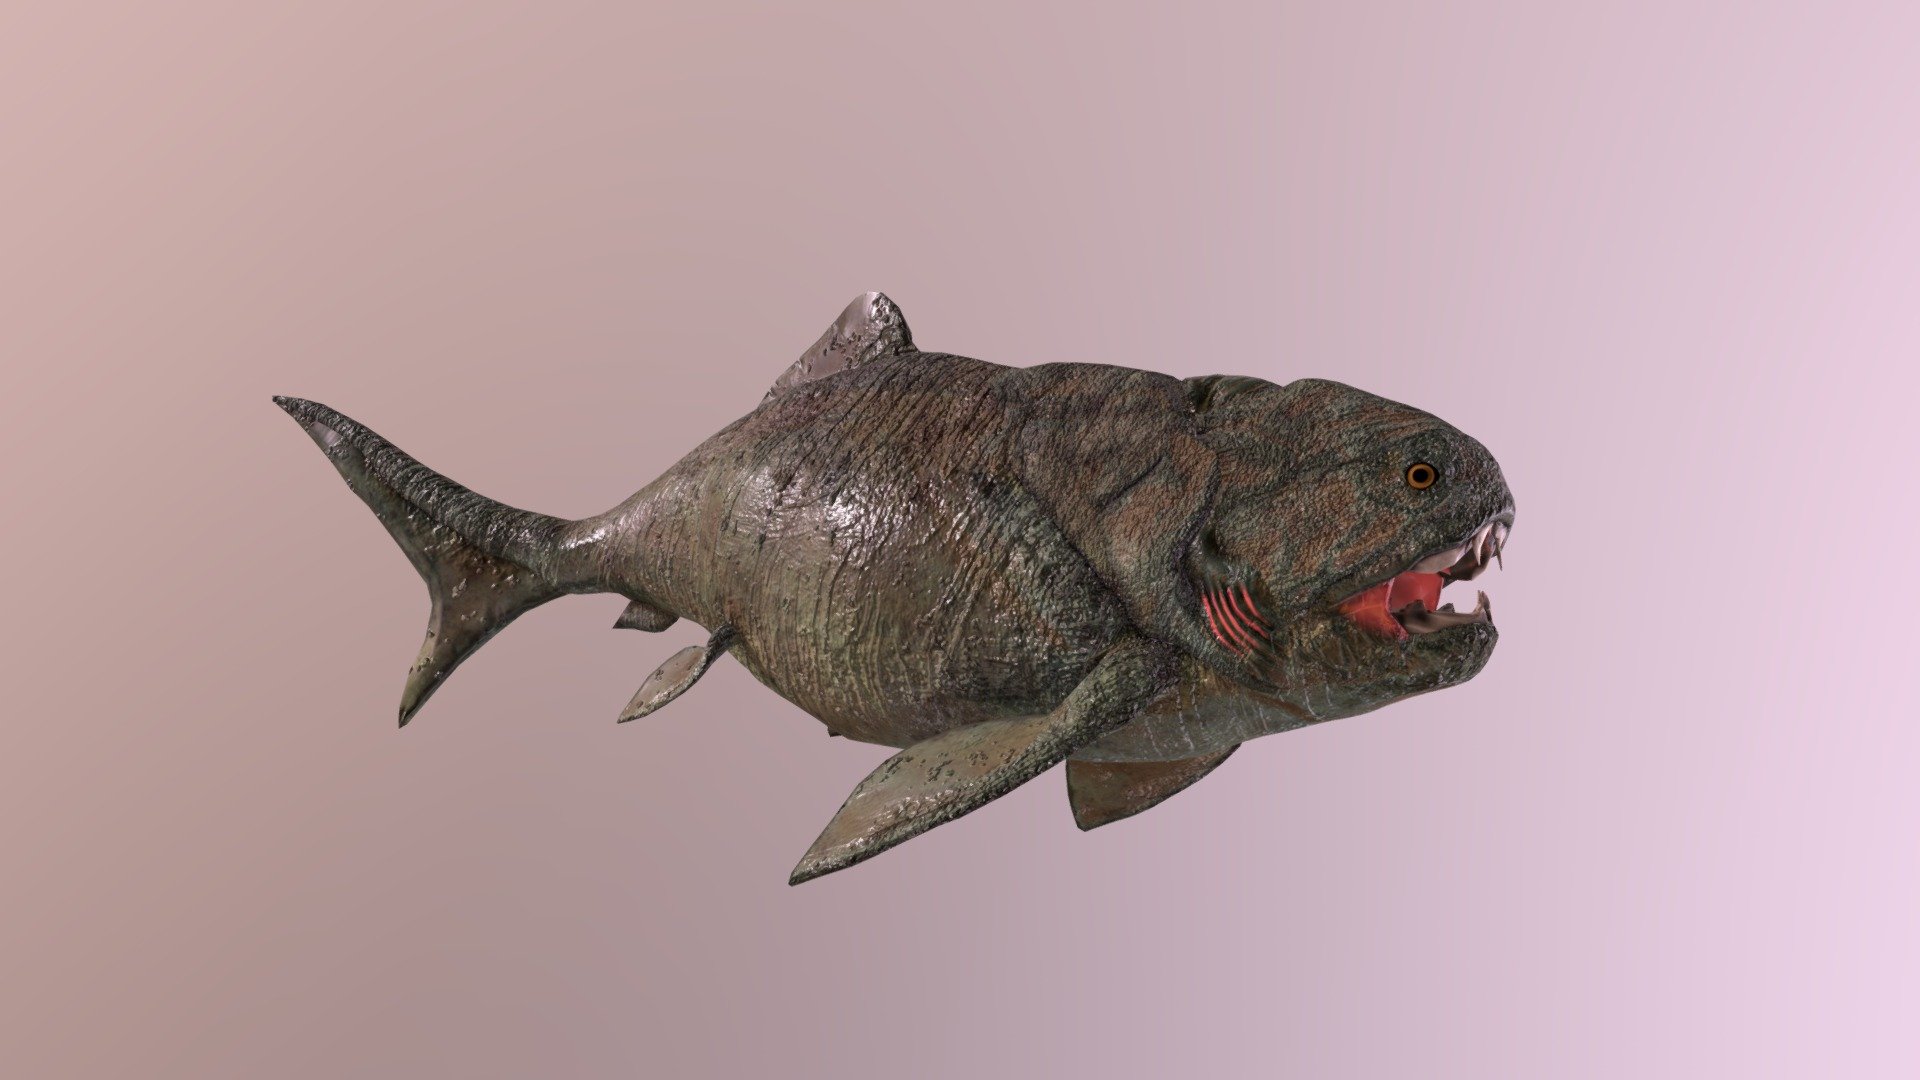 Dunkleosteus terelli, from my thesis project 3d model